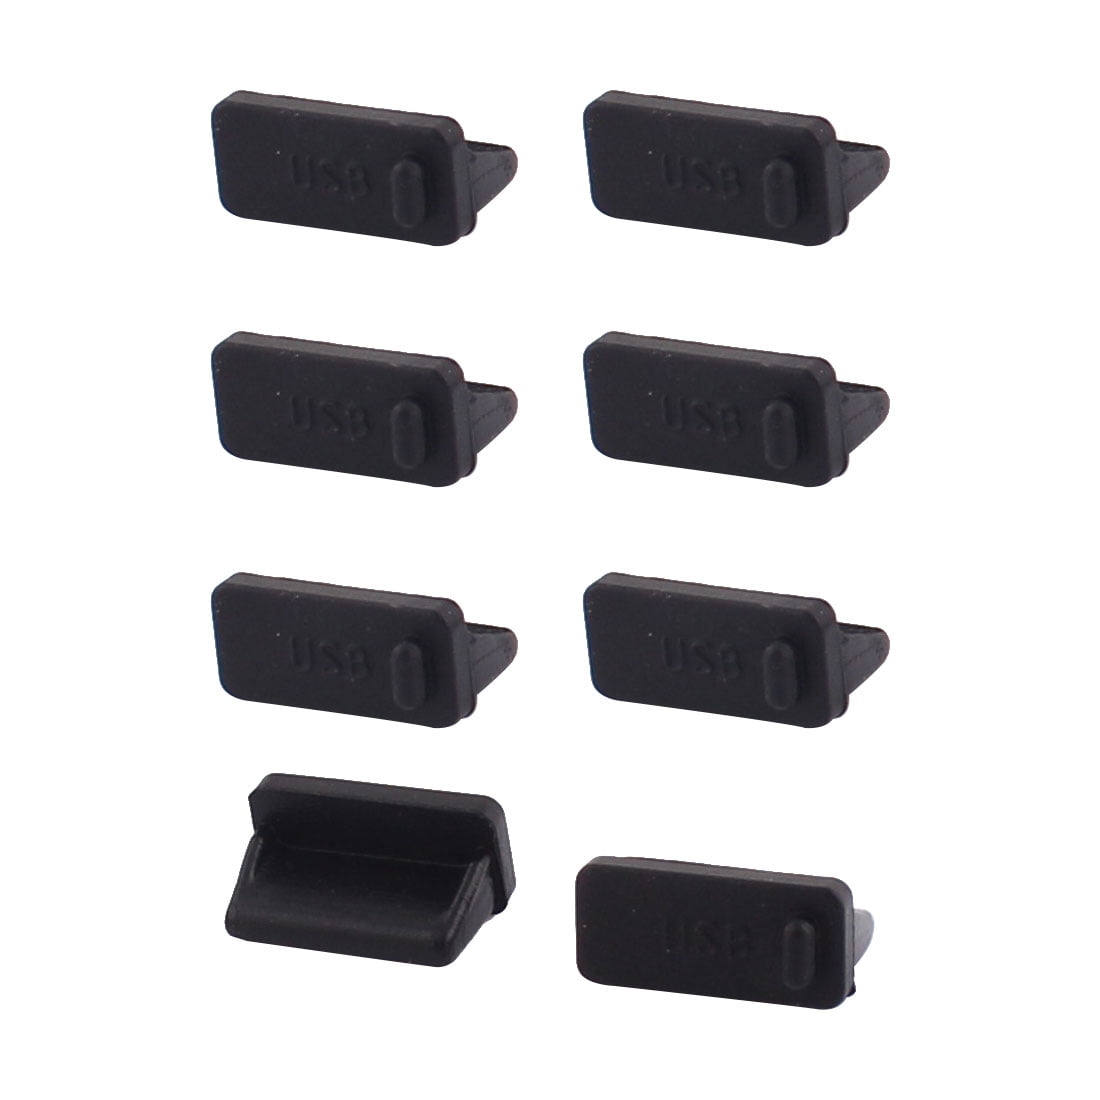 50 PCS, Black Kebinfen 50 PCS Black Silicone USB Port Cover Anti Dust Protector for USB Type-A Female End 